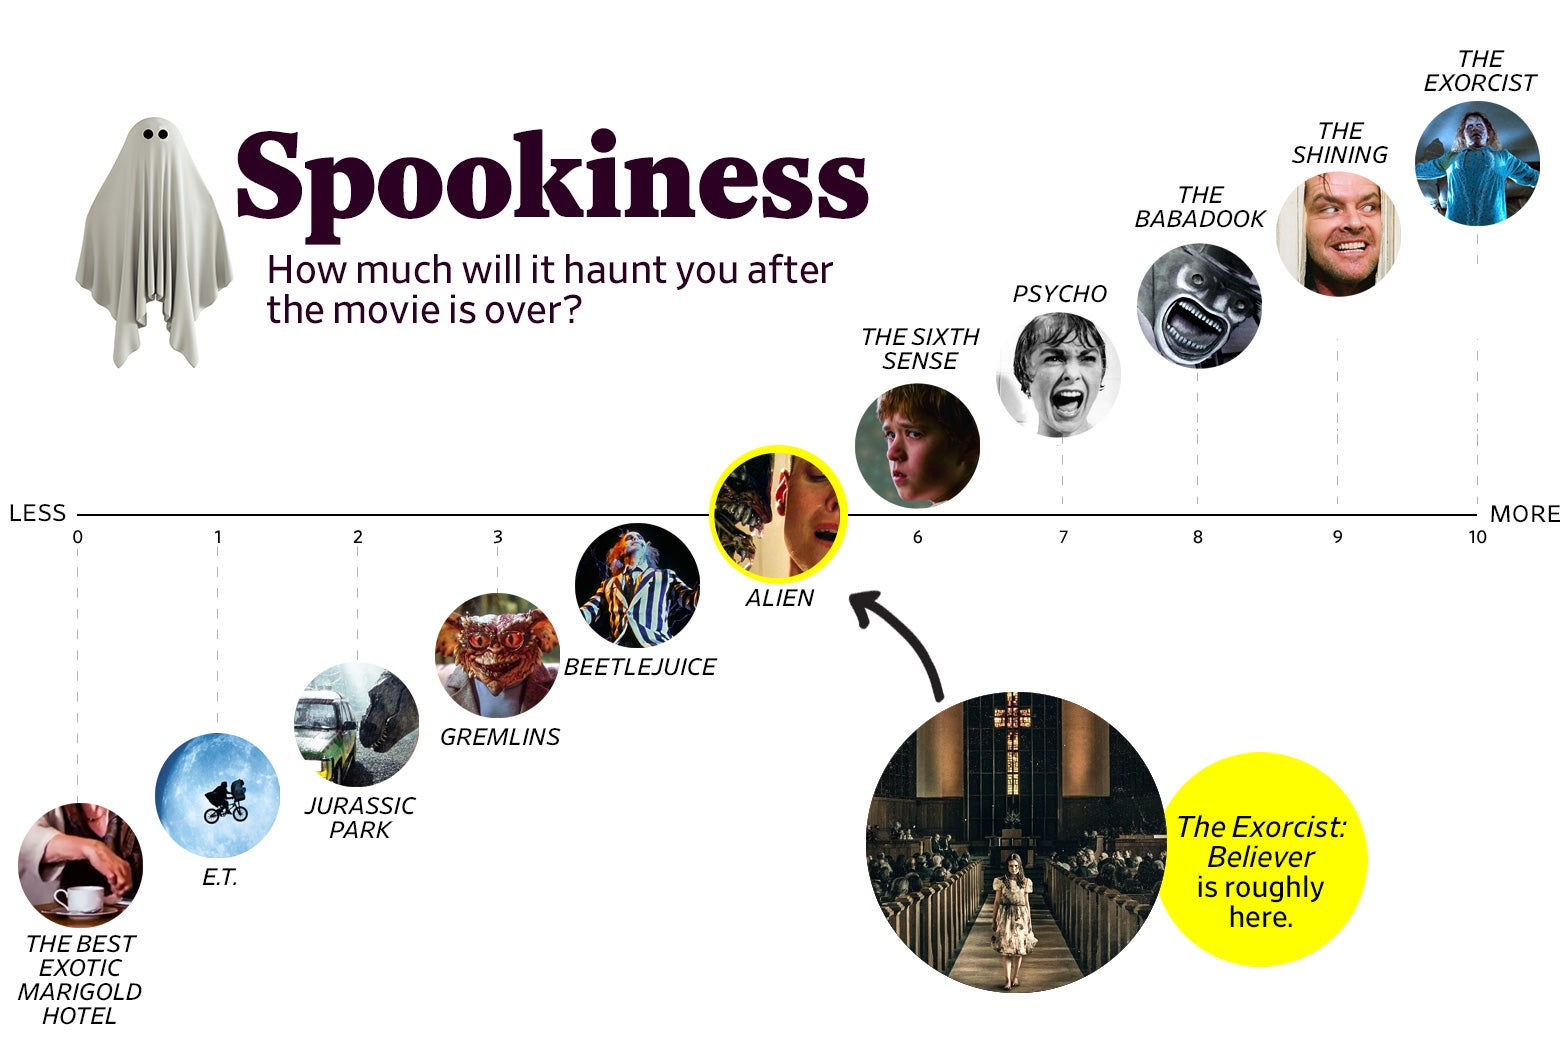 A chart titled “Spookiness: How much will it haunt you after the movie is over?” shows that The Exorcist: Believer ranks a 5 in spookiness, roughly the same as Alien, while the original ranks a 10. The scale ranges from The Best Exotic Marigold Hotel (0) to The Exorcist (10).